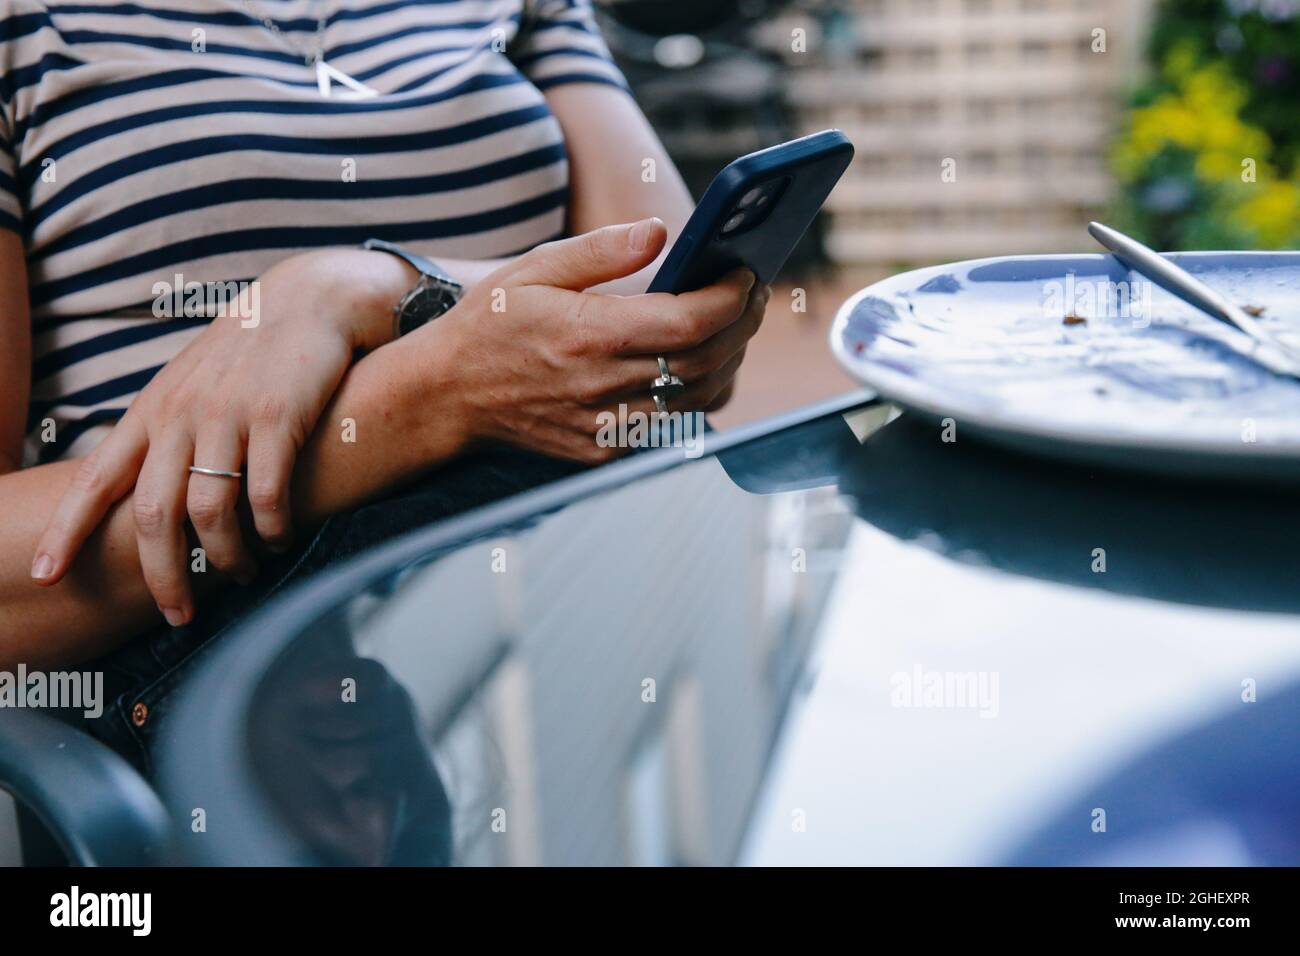 A woman checks her iphone smartphone at the dinner table outside in London, England Stock Photo